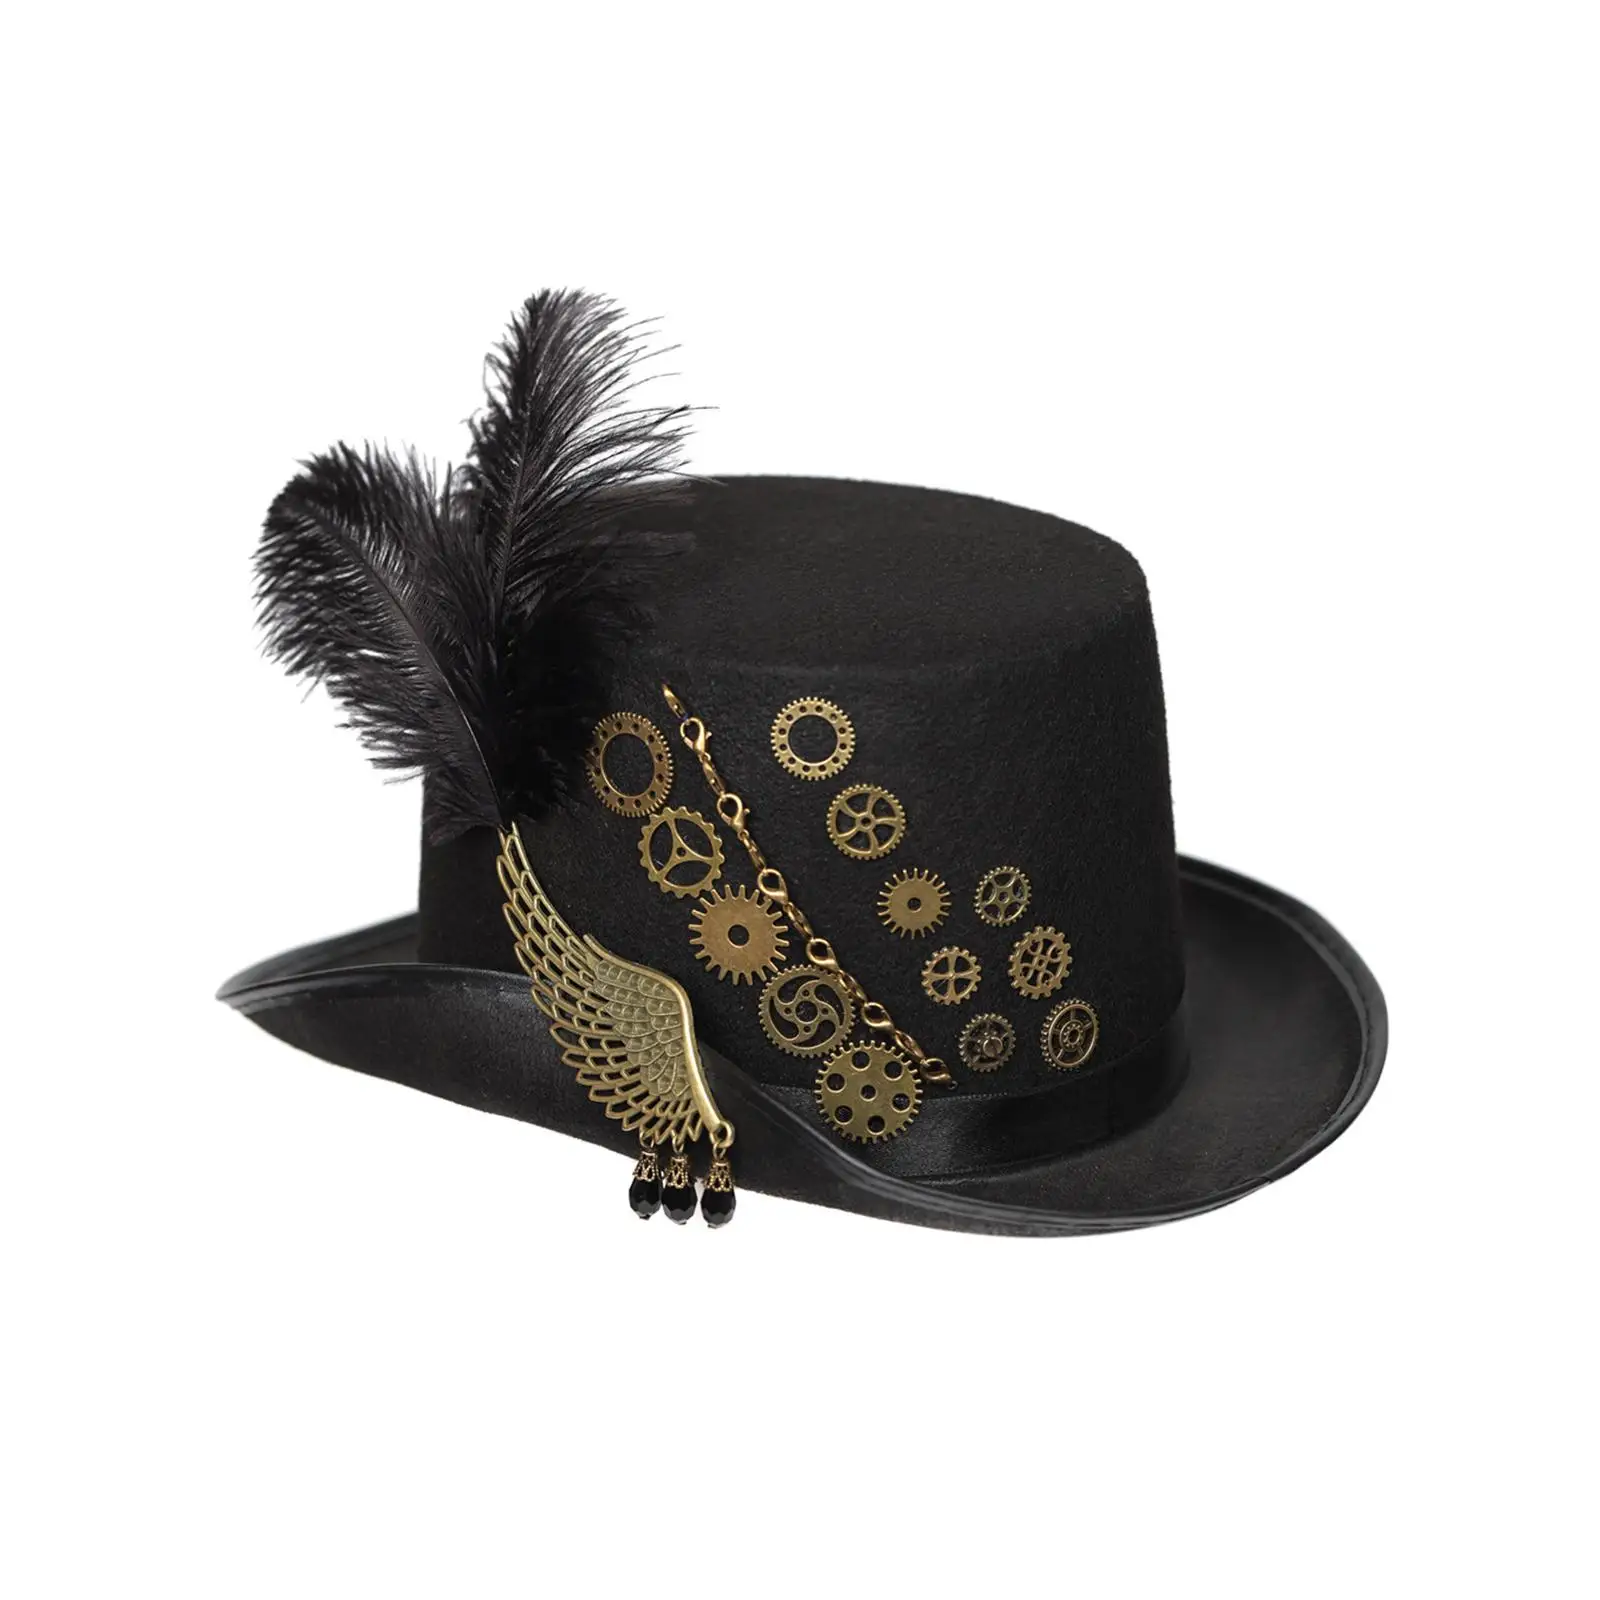 Vintage Steampunk Hat with Wing, Gears Black Top Hat Elegant Gothic Accessories Thick Felt Material for Men Women Durable Gift